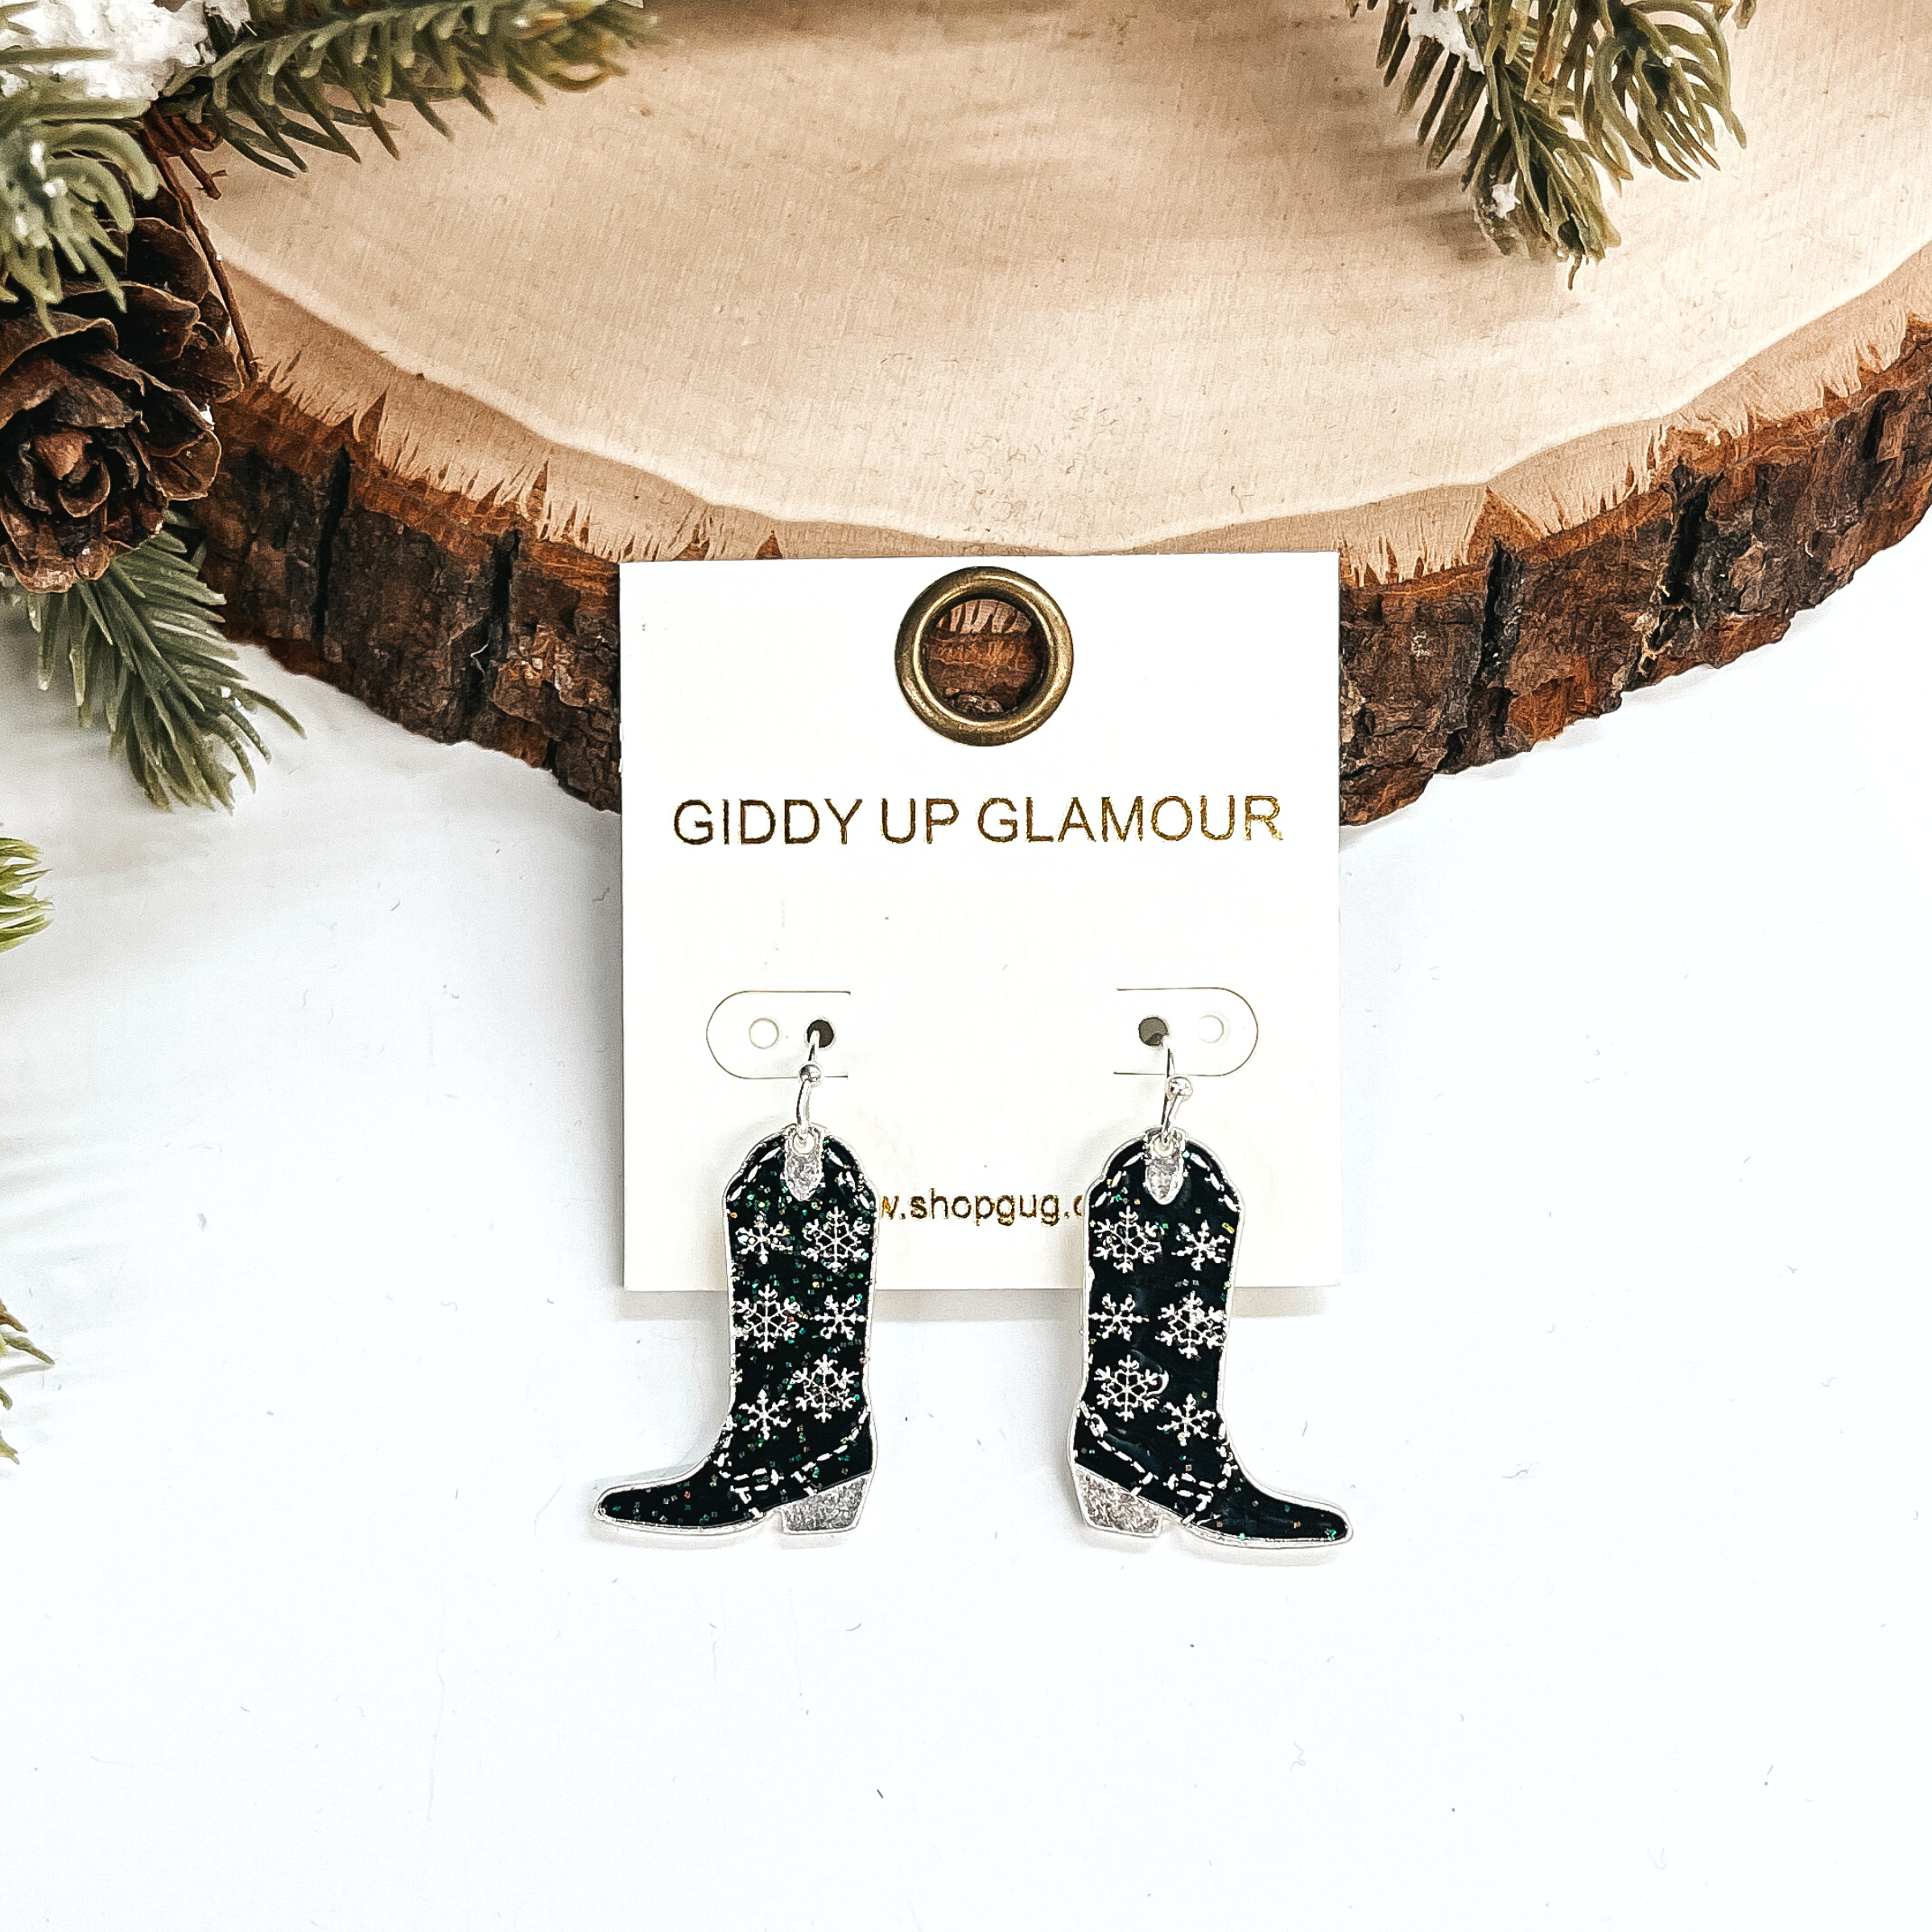 These are boot pendant drop earrings in black glitter and silver.  The earrings have a snowflake pattern in silver. These earrings are taken  leaning up against a slab of wood and on a white background with a pine cone  tree in the back as decor.